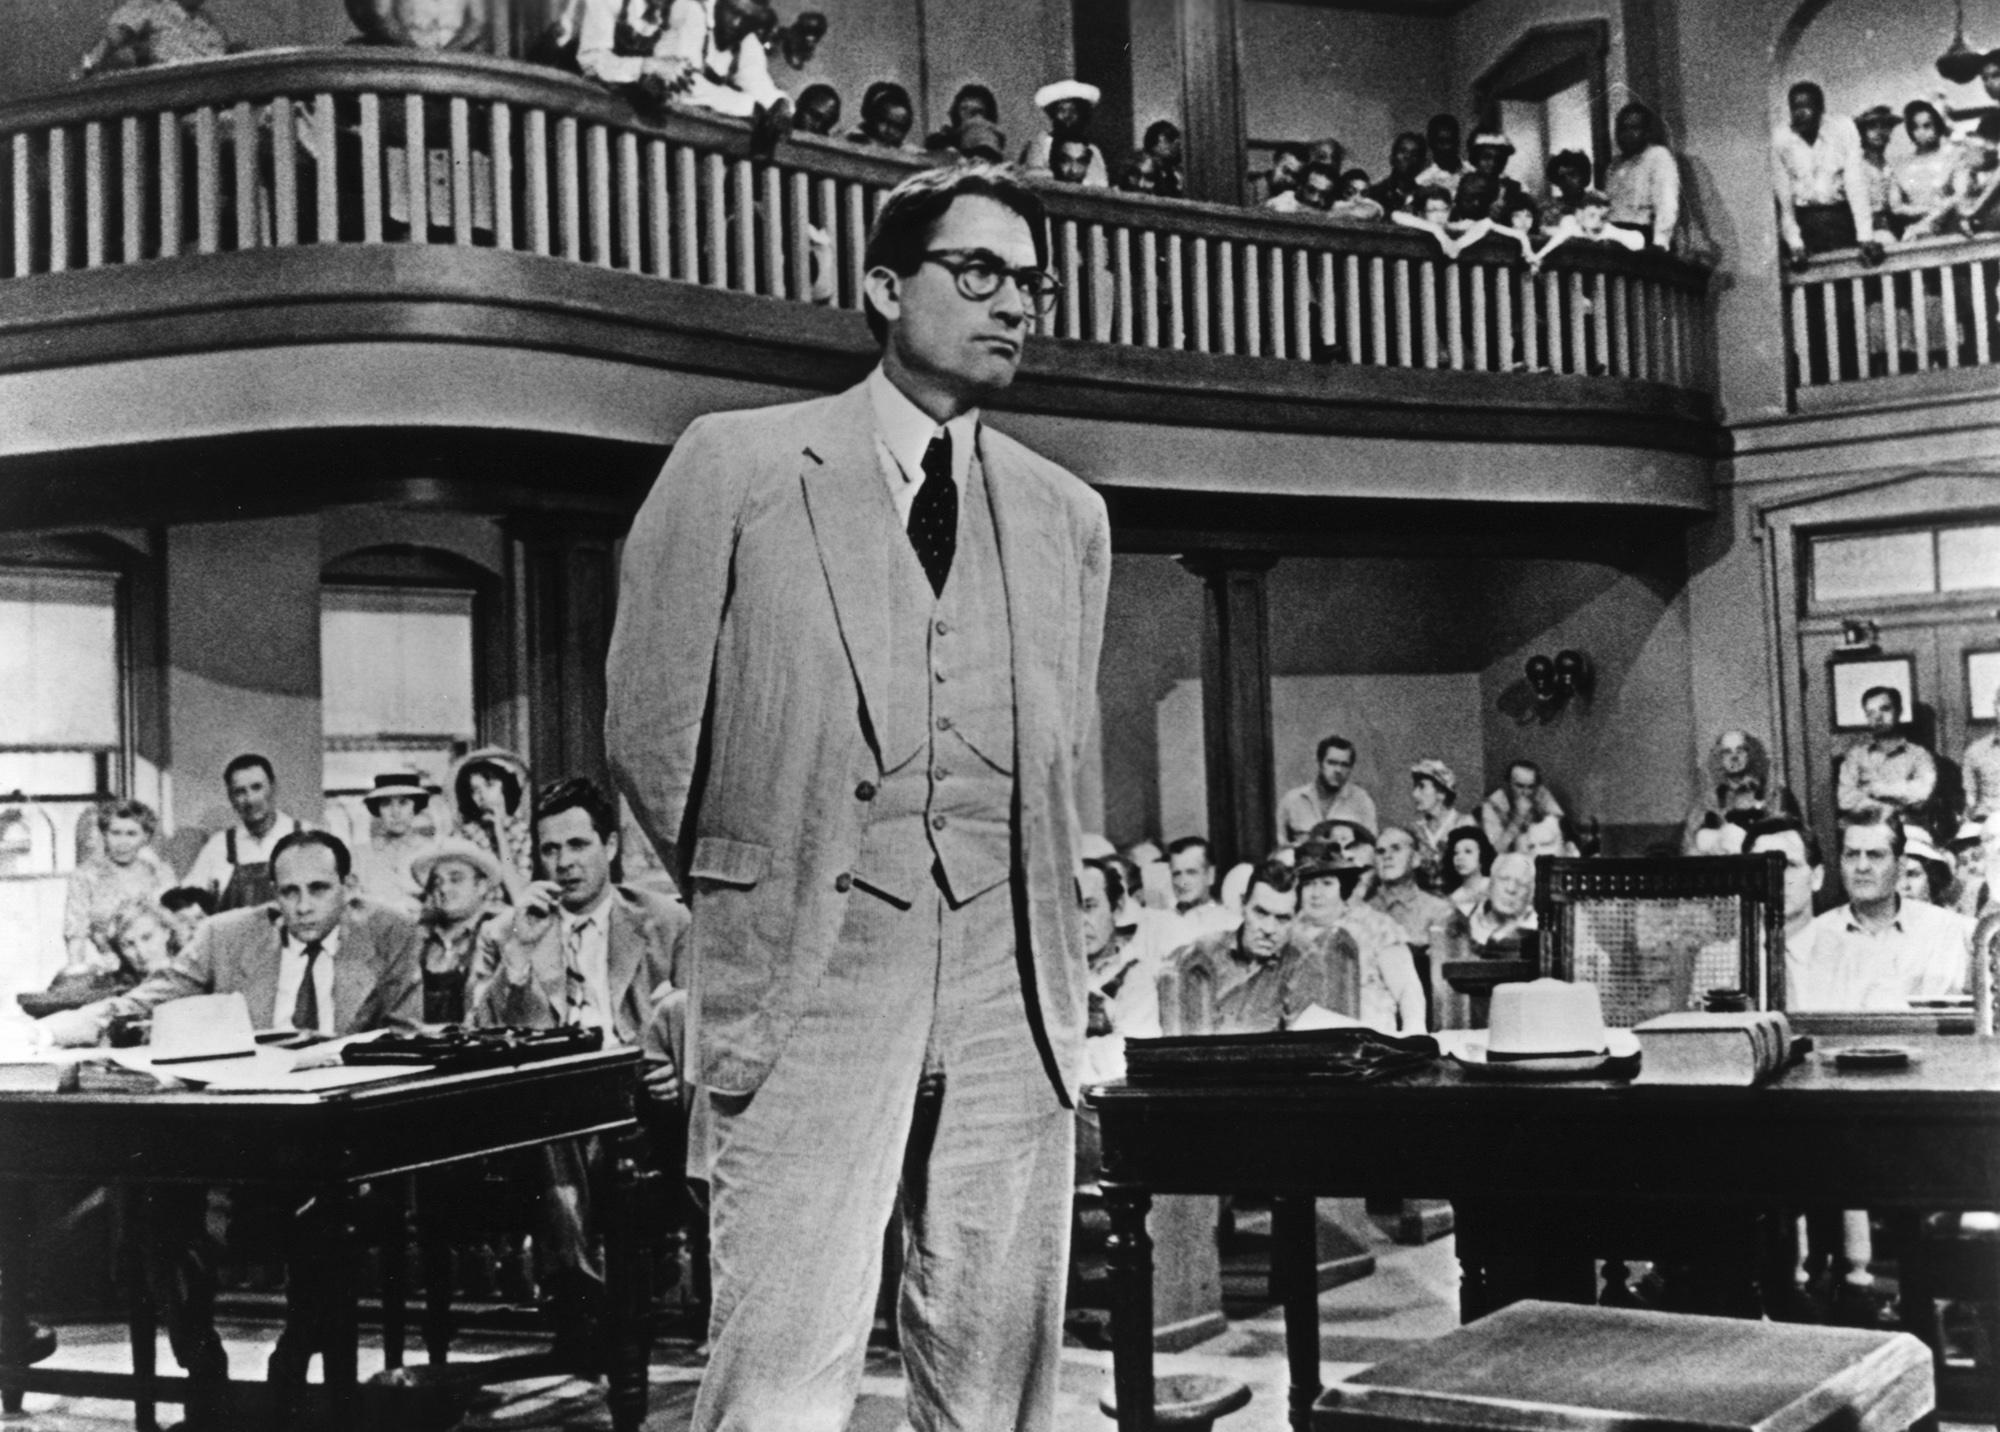 Gregory Peck Portrays Attorney Atticus Finch In The 1962 Film To